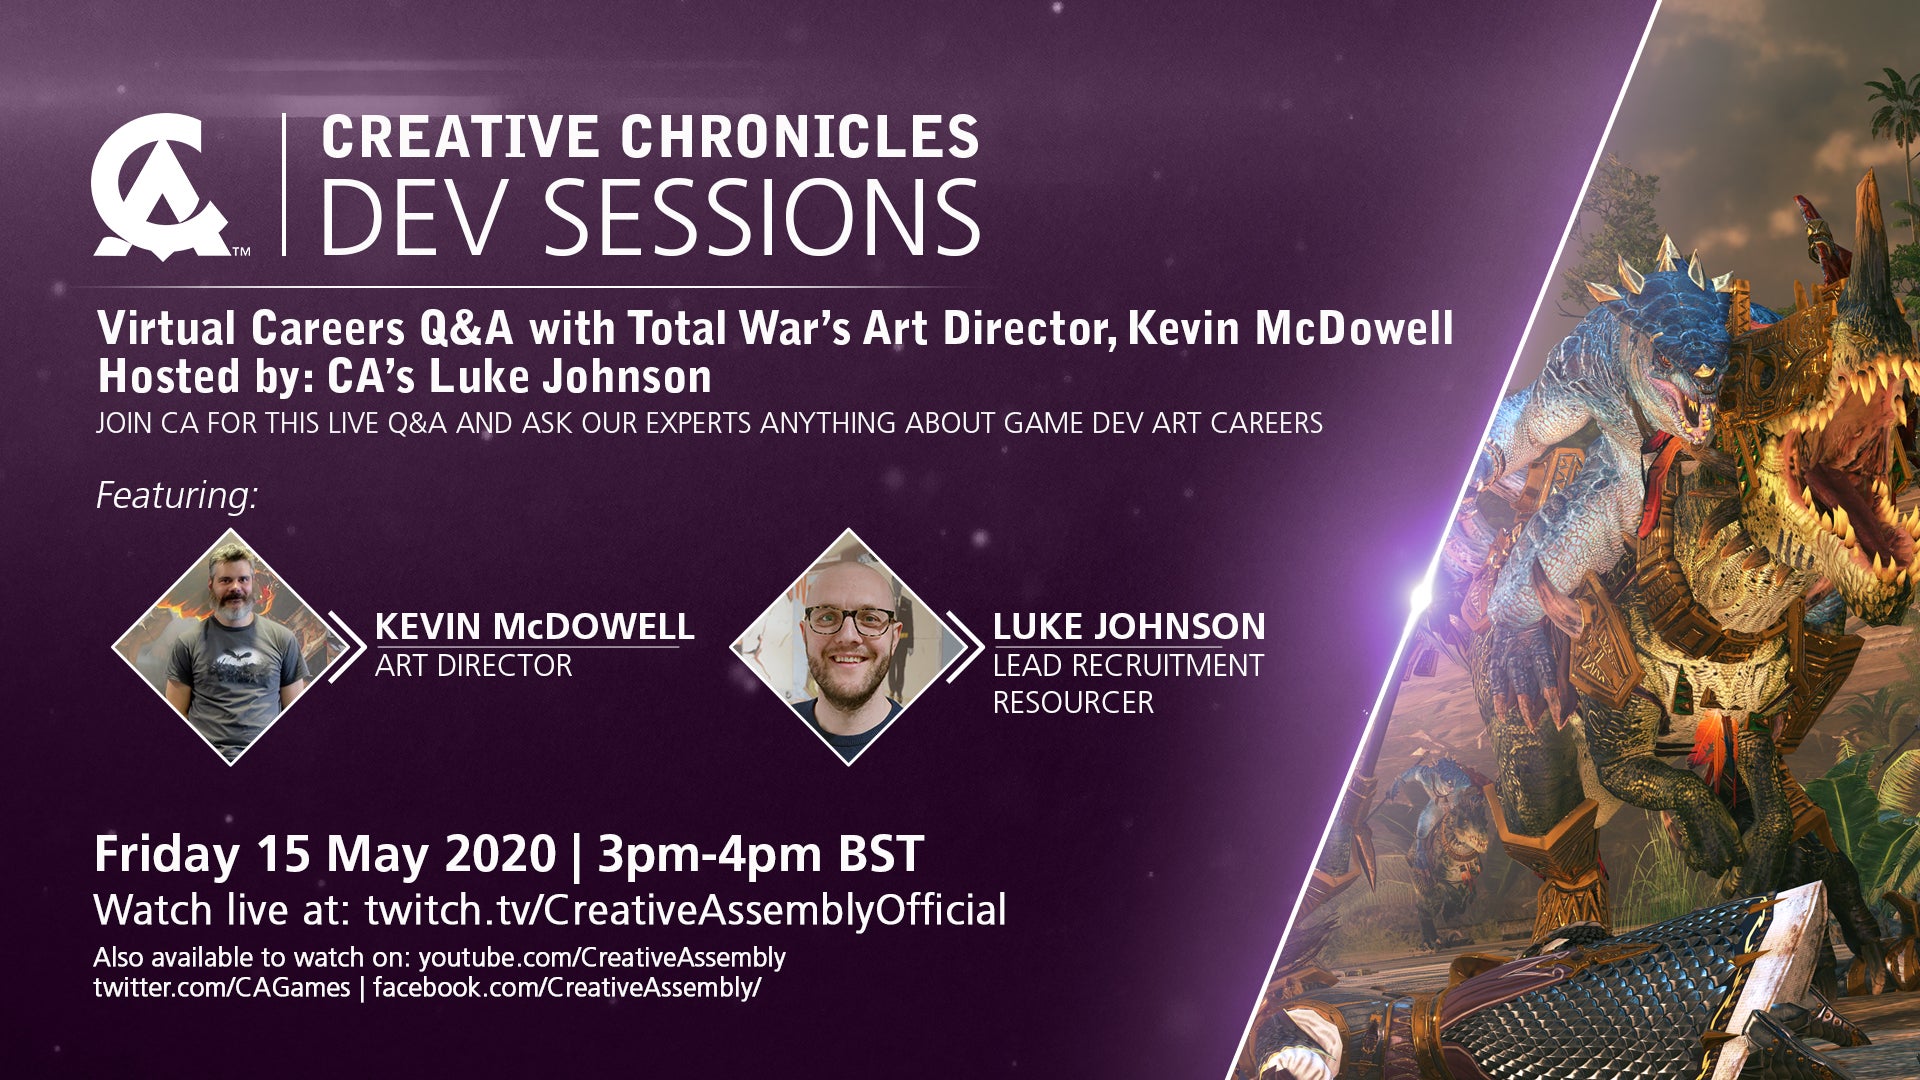 Image for Get your art career questions answered in a live Q&A with Creative Assembly today